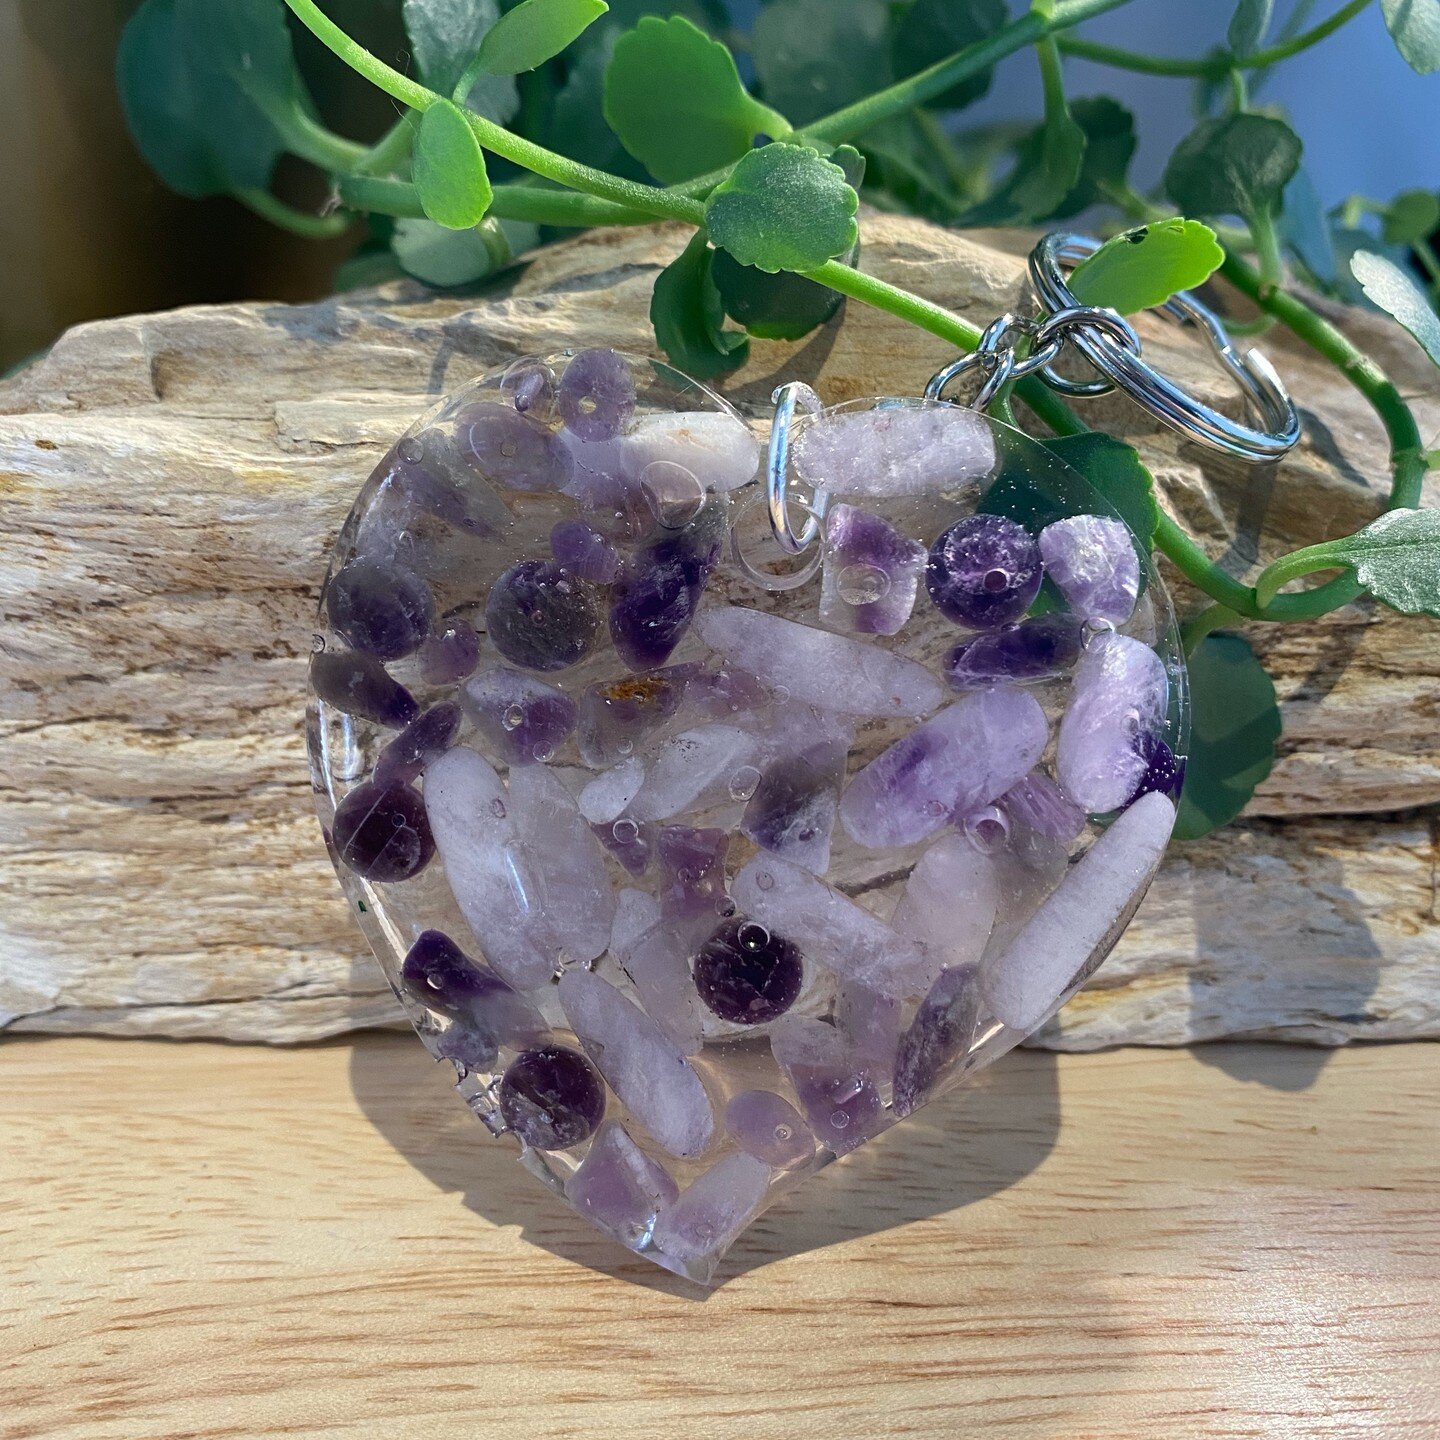 With Valentines creeping up on us, I have a collection of crystal hearts and heart shaped resin keyrings filled with crystal chips.
https://www.etsy.com/uk/shop/RejuvenatingCrystals